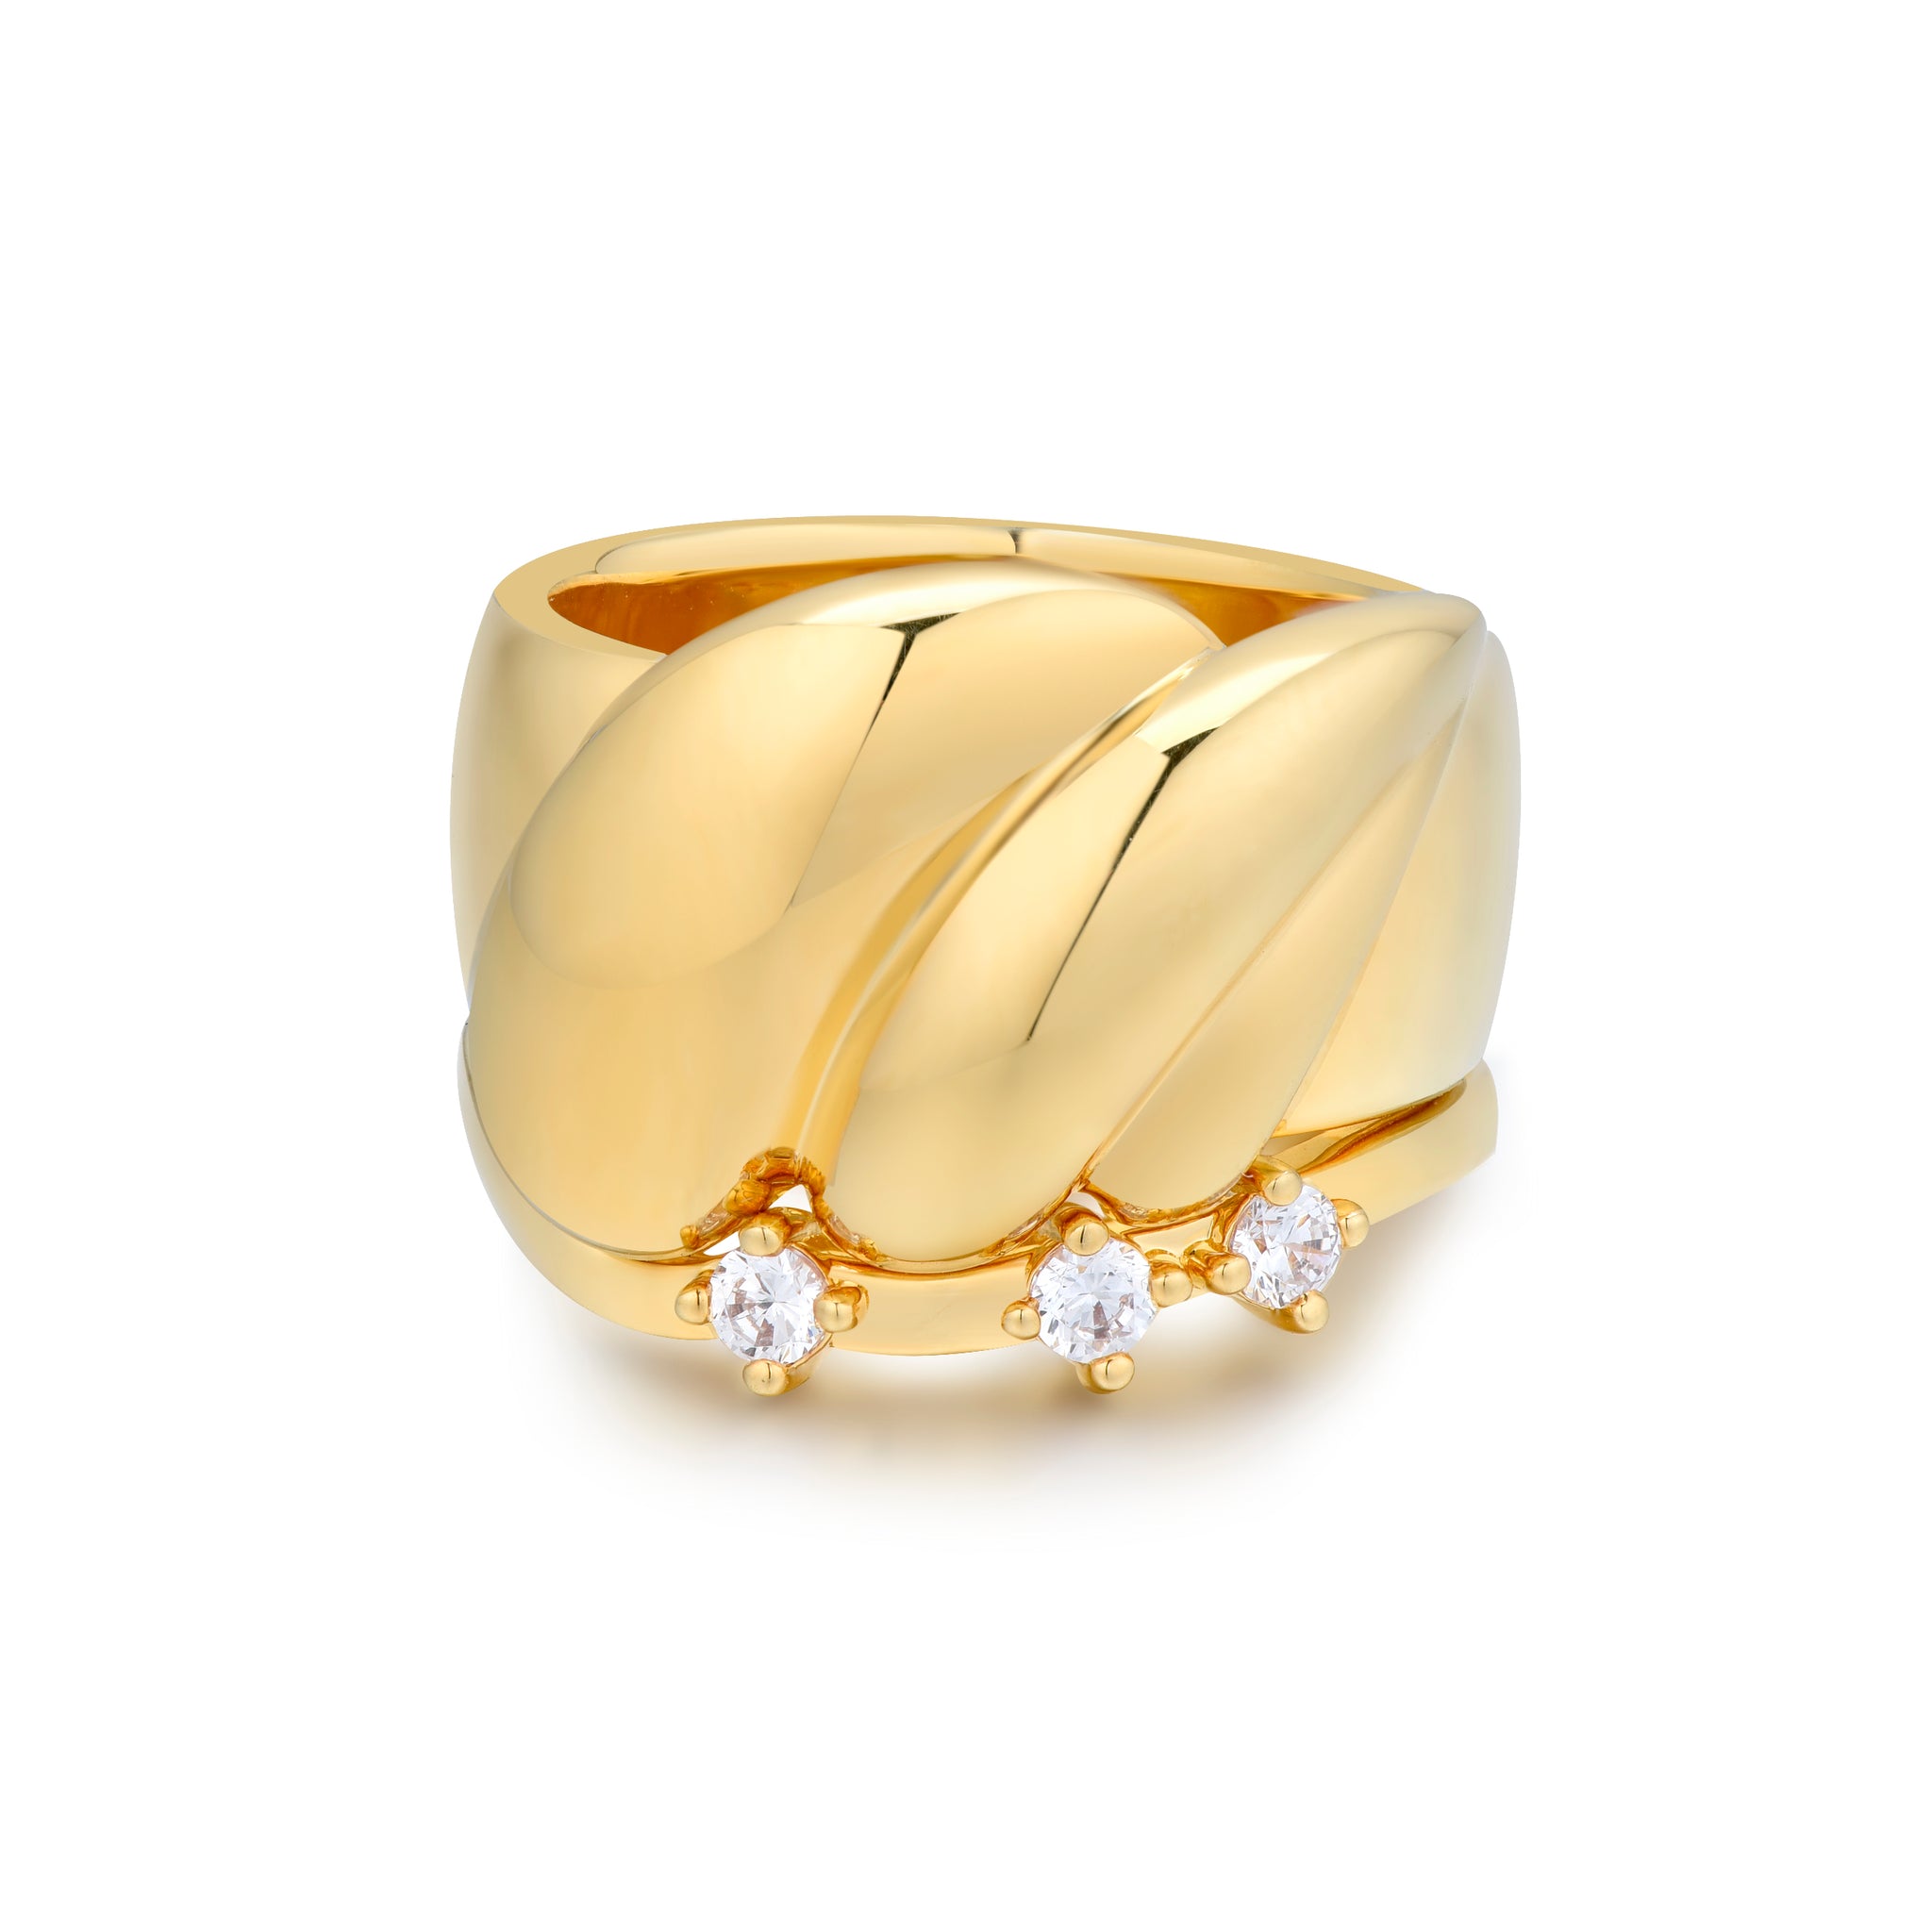 Stacking Rings Set - 18K recycled gold vermeil on recycled silver, 0.105ct zirconia